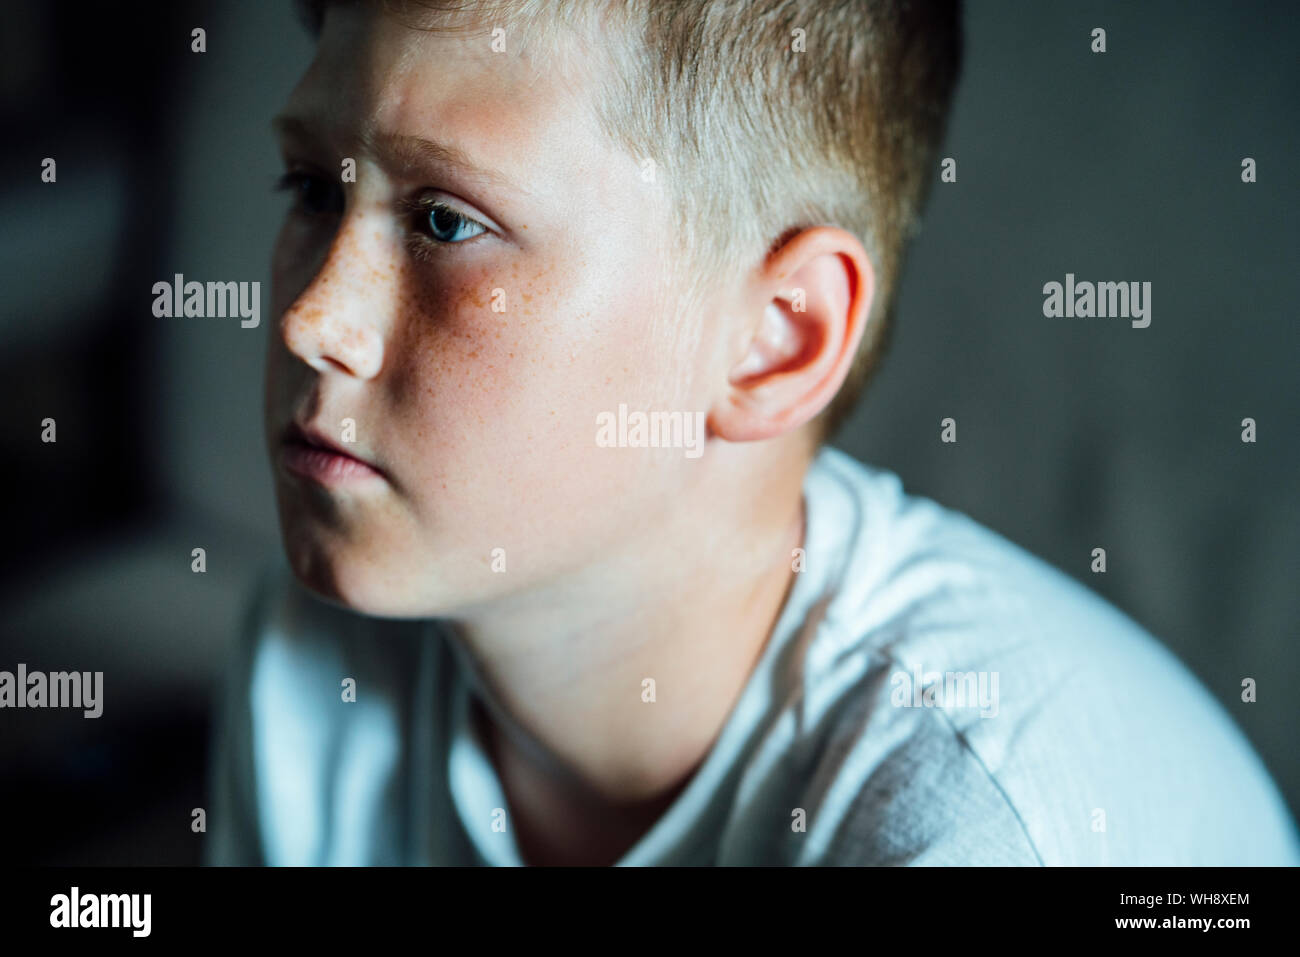 Portrait of boy with freckles Stock Photo